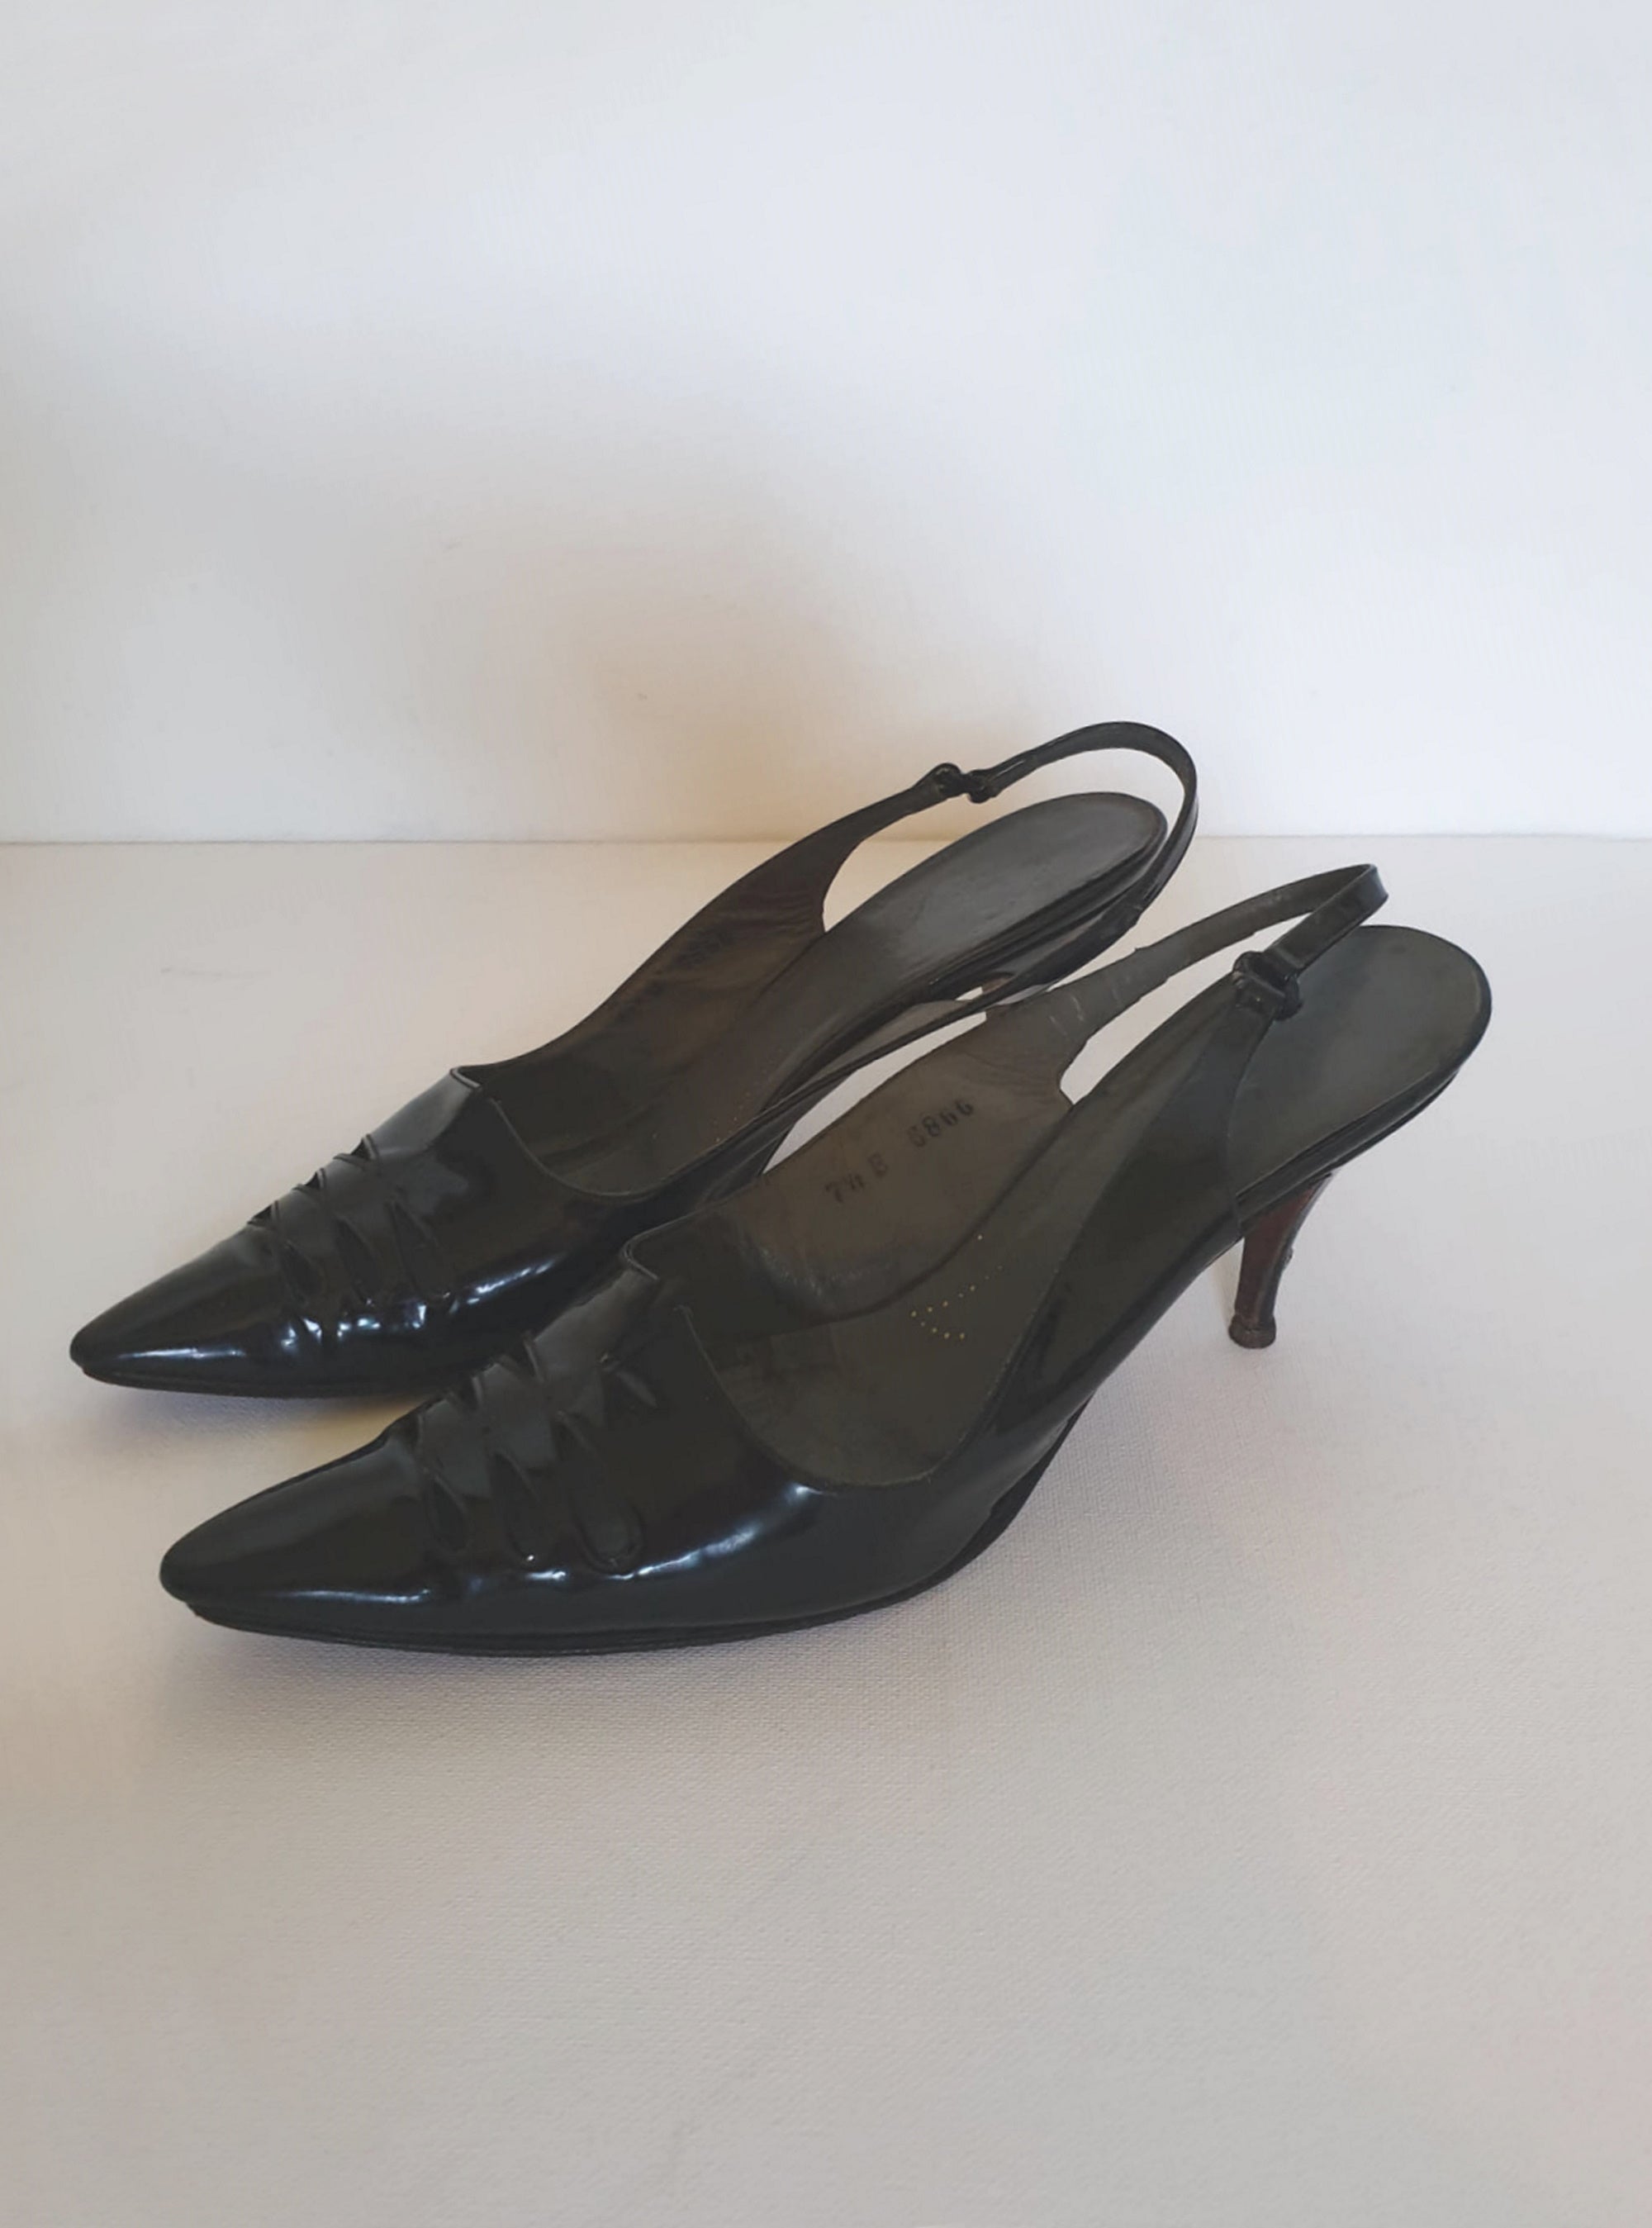 1960s vintage witchy patnet leather stiletto heel shoes size 7.5B italian